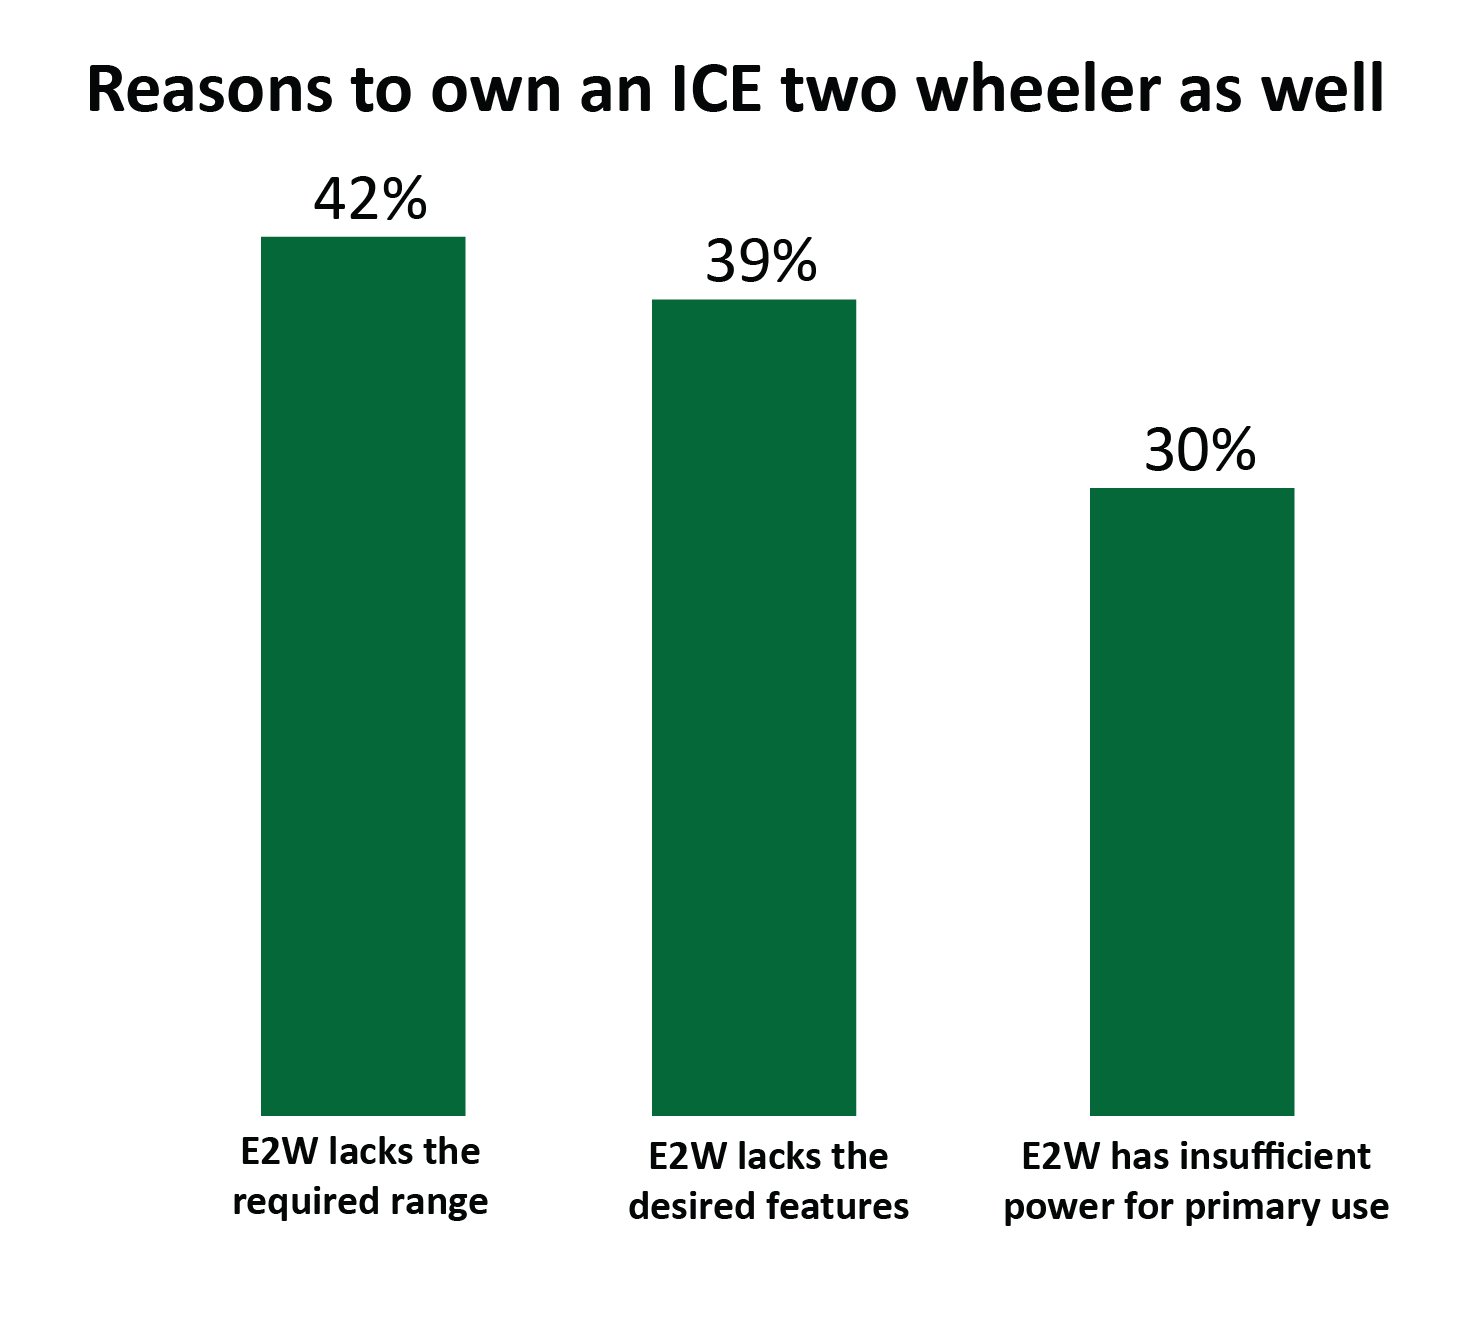 Reasons for owning ICE 2-wheelers